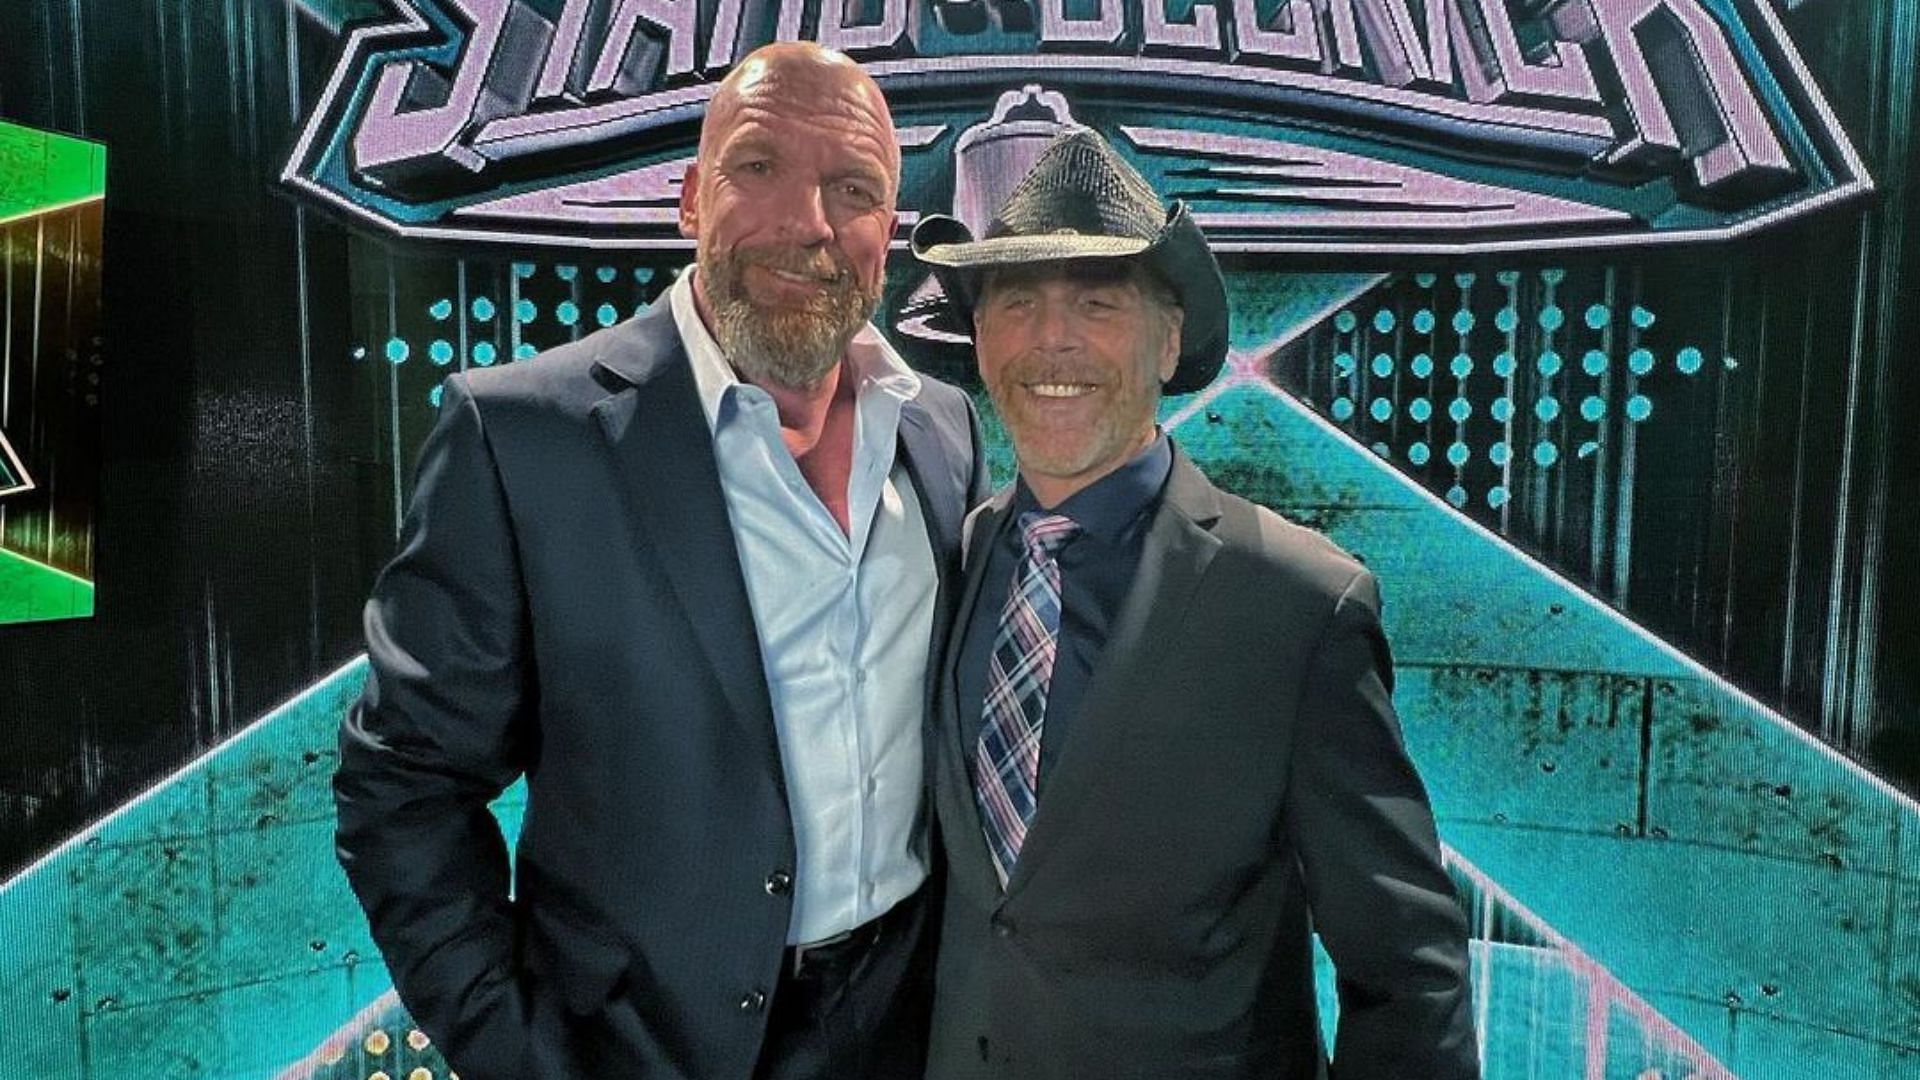 Triple H and Shawn Michaels revolutionized WWE